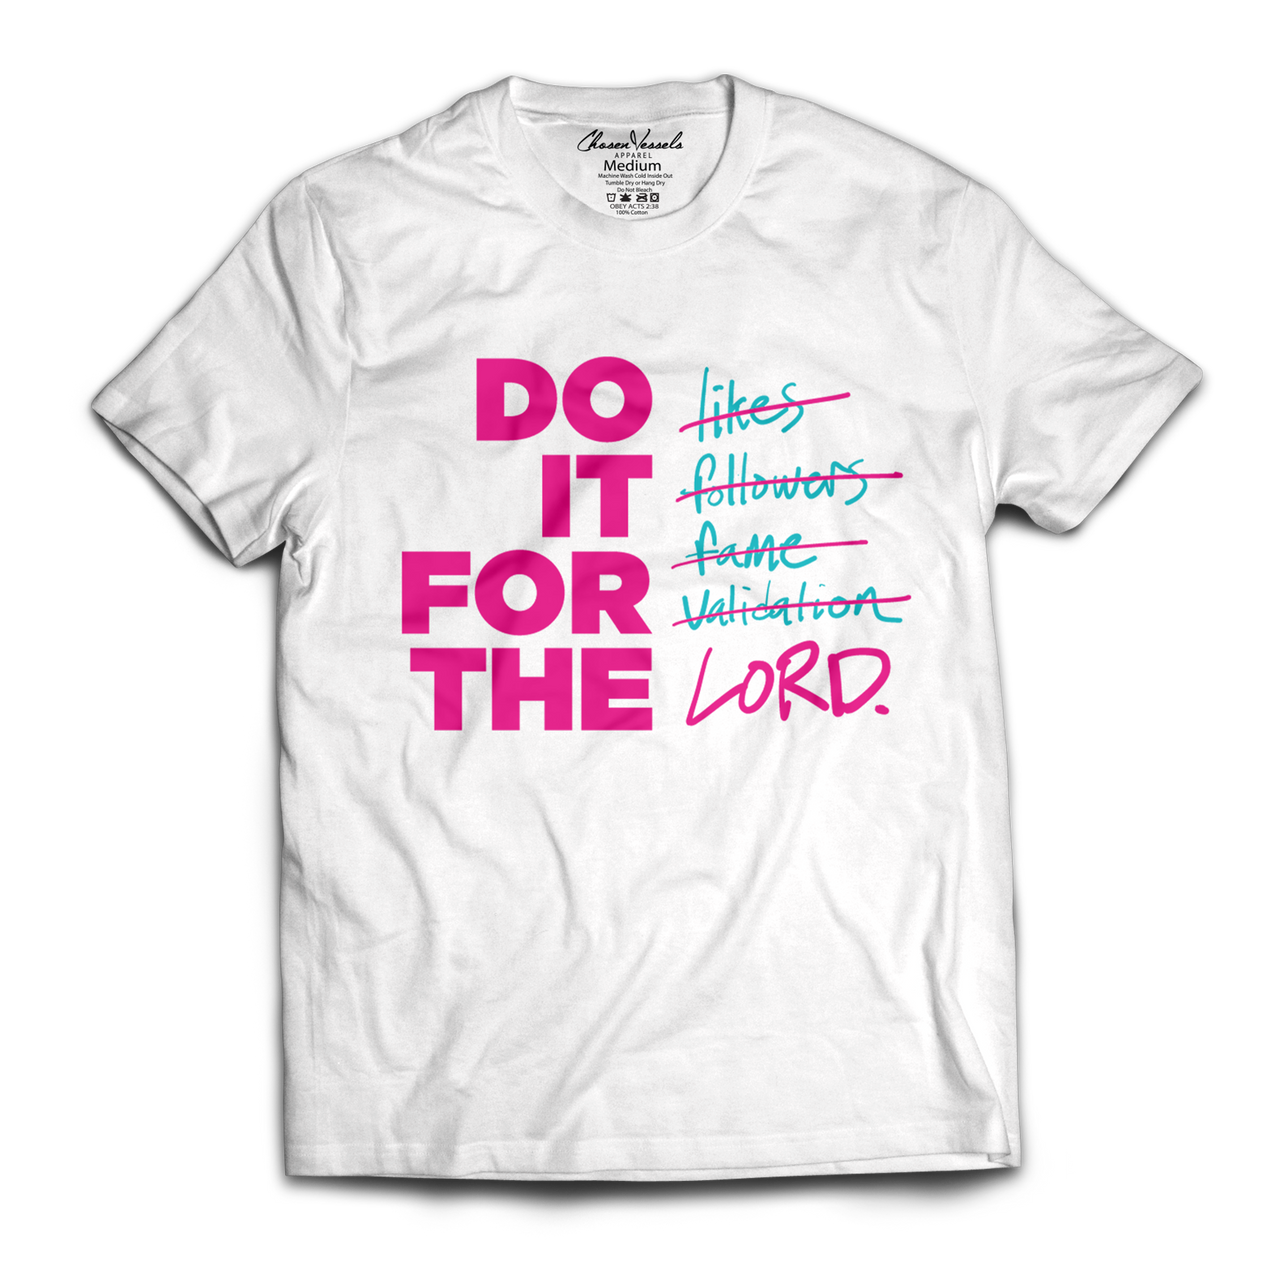 Do it For the Lord - Miami